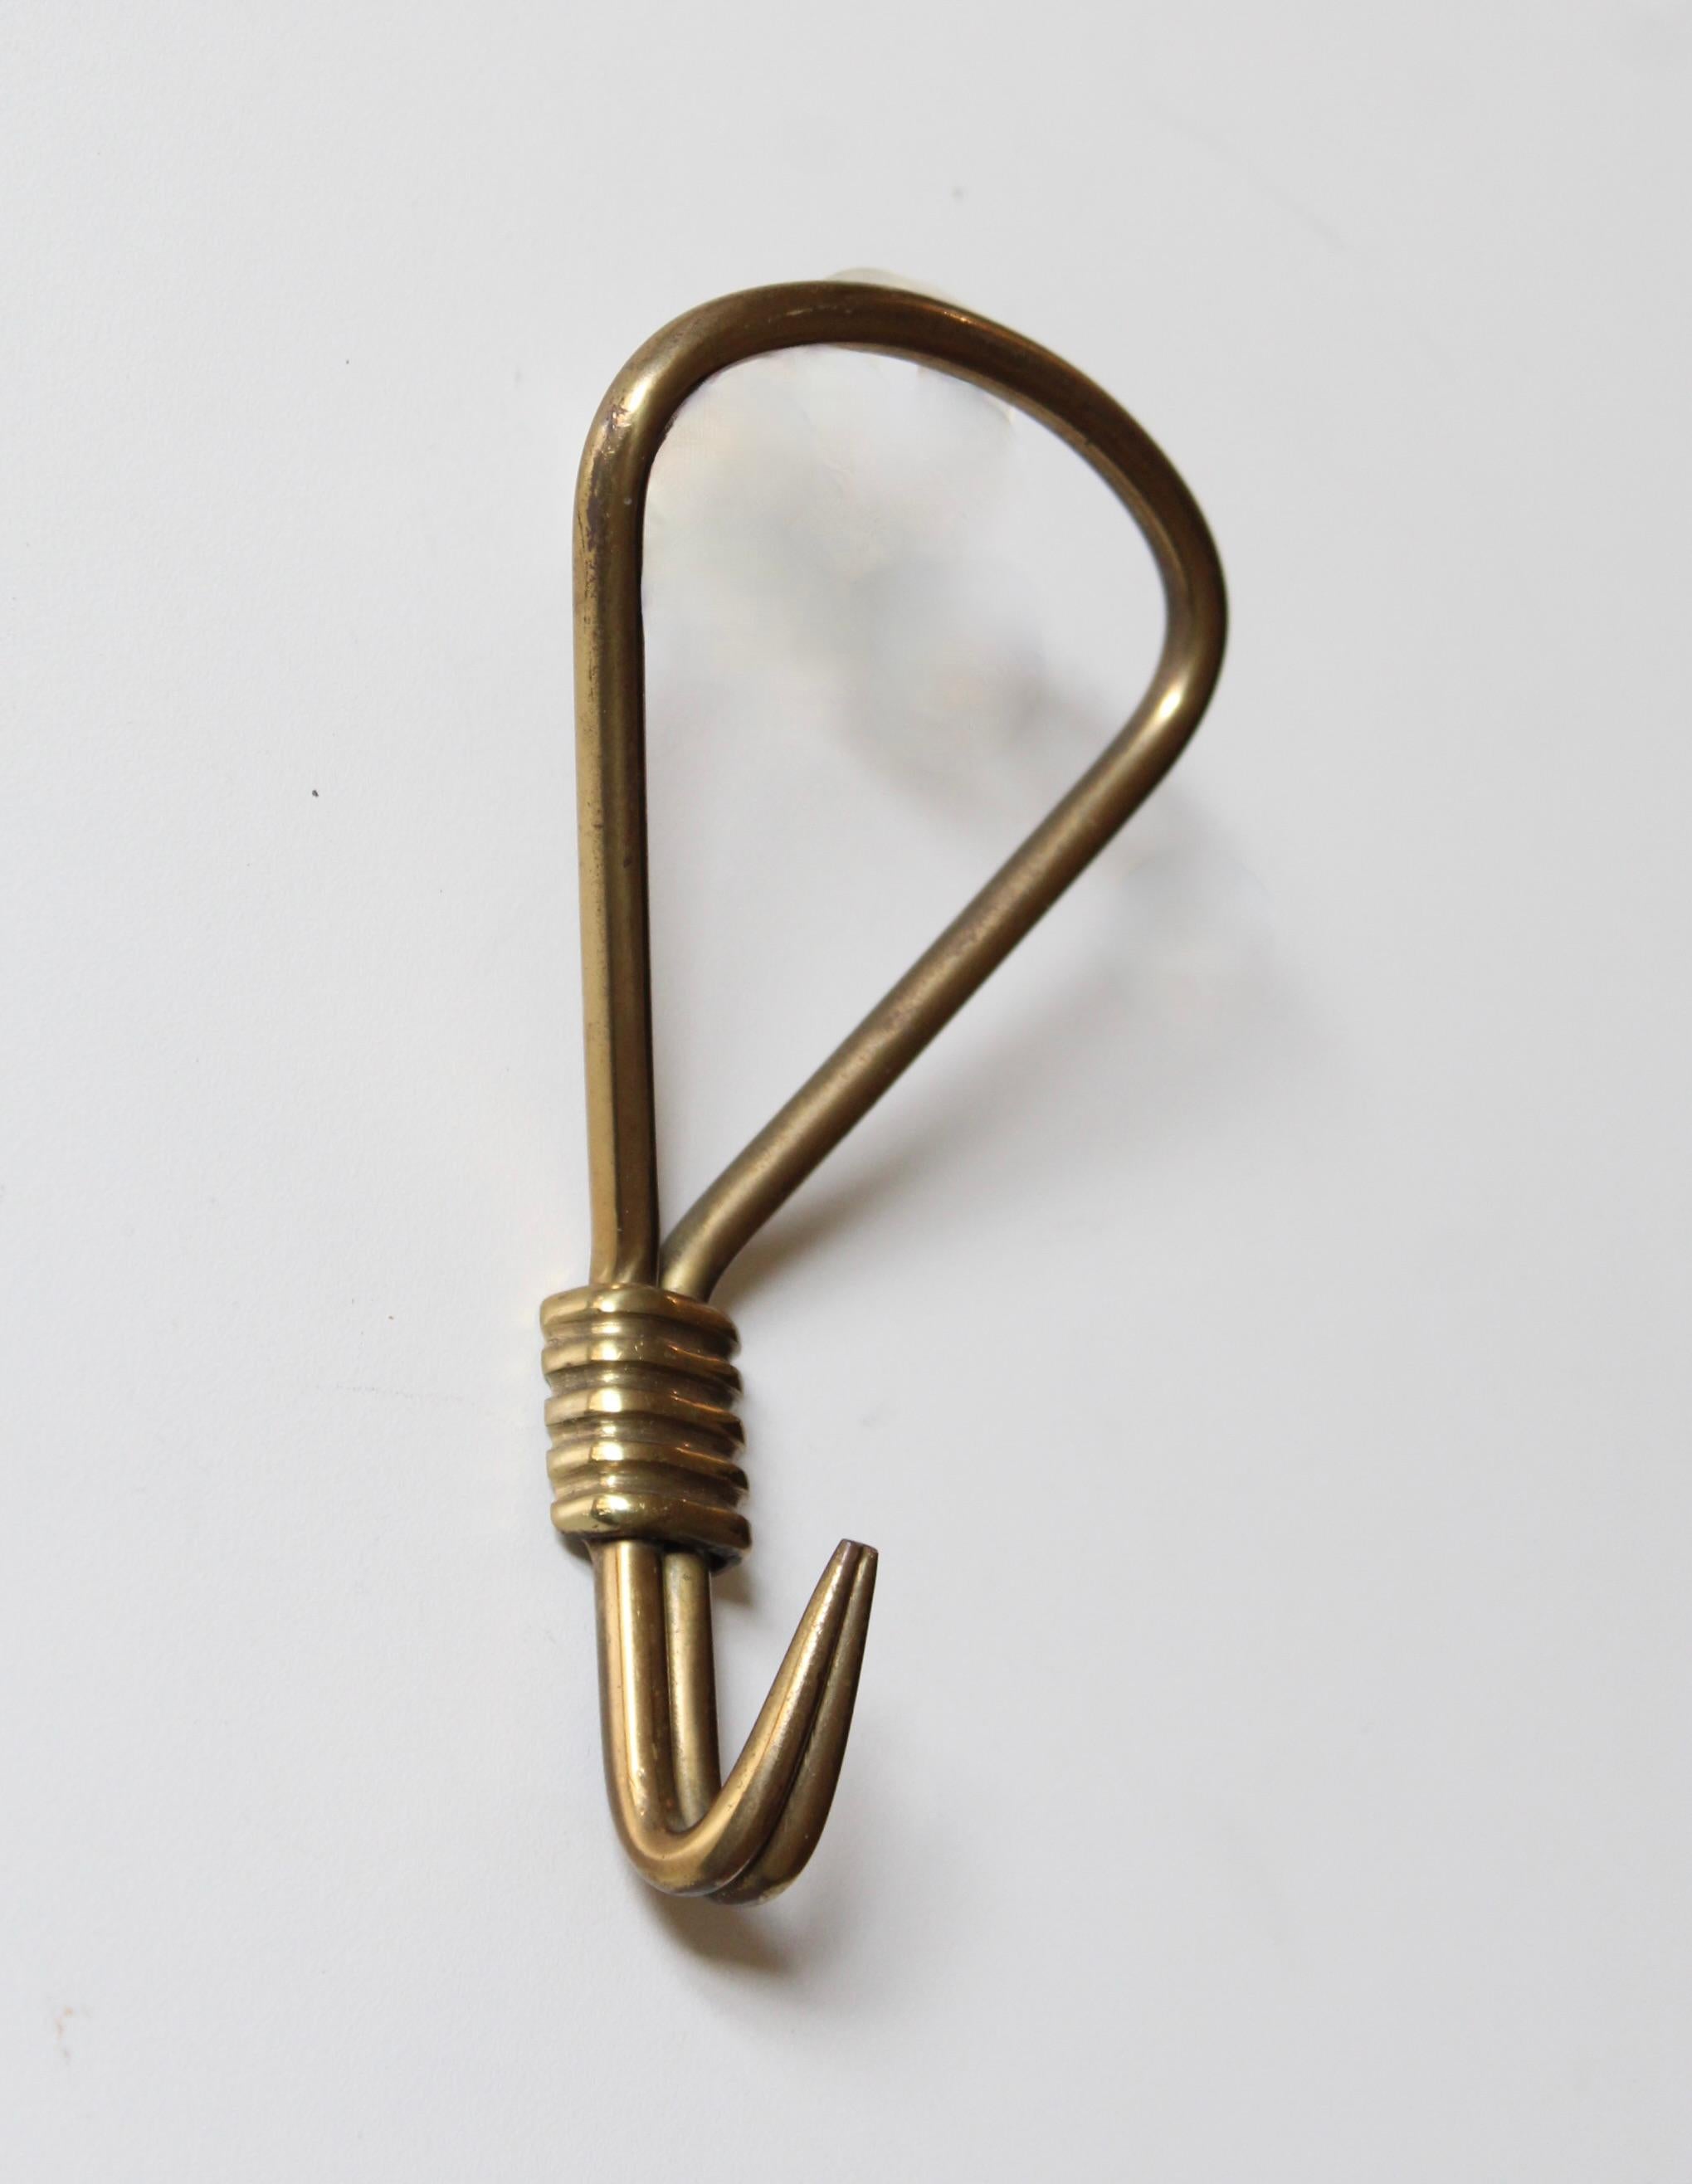 A brass coat hanger designed and produced in Italy, 1940s.